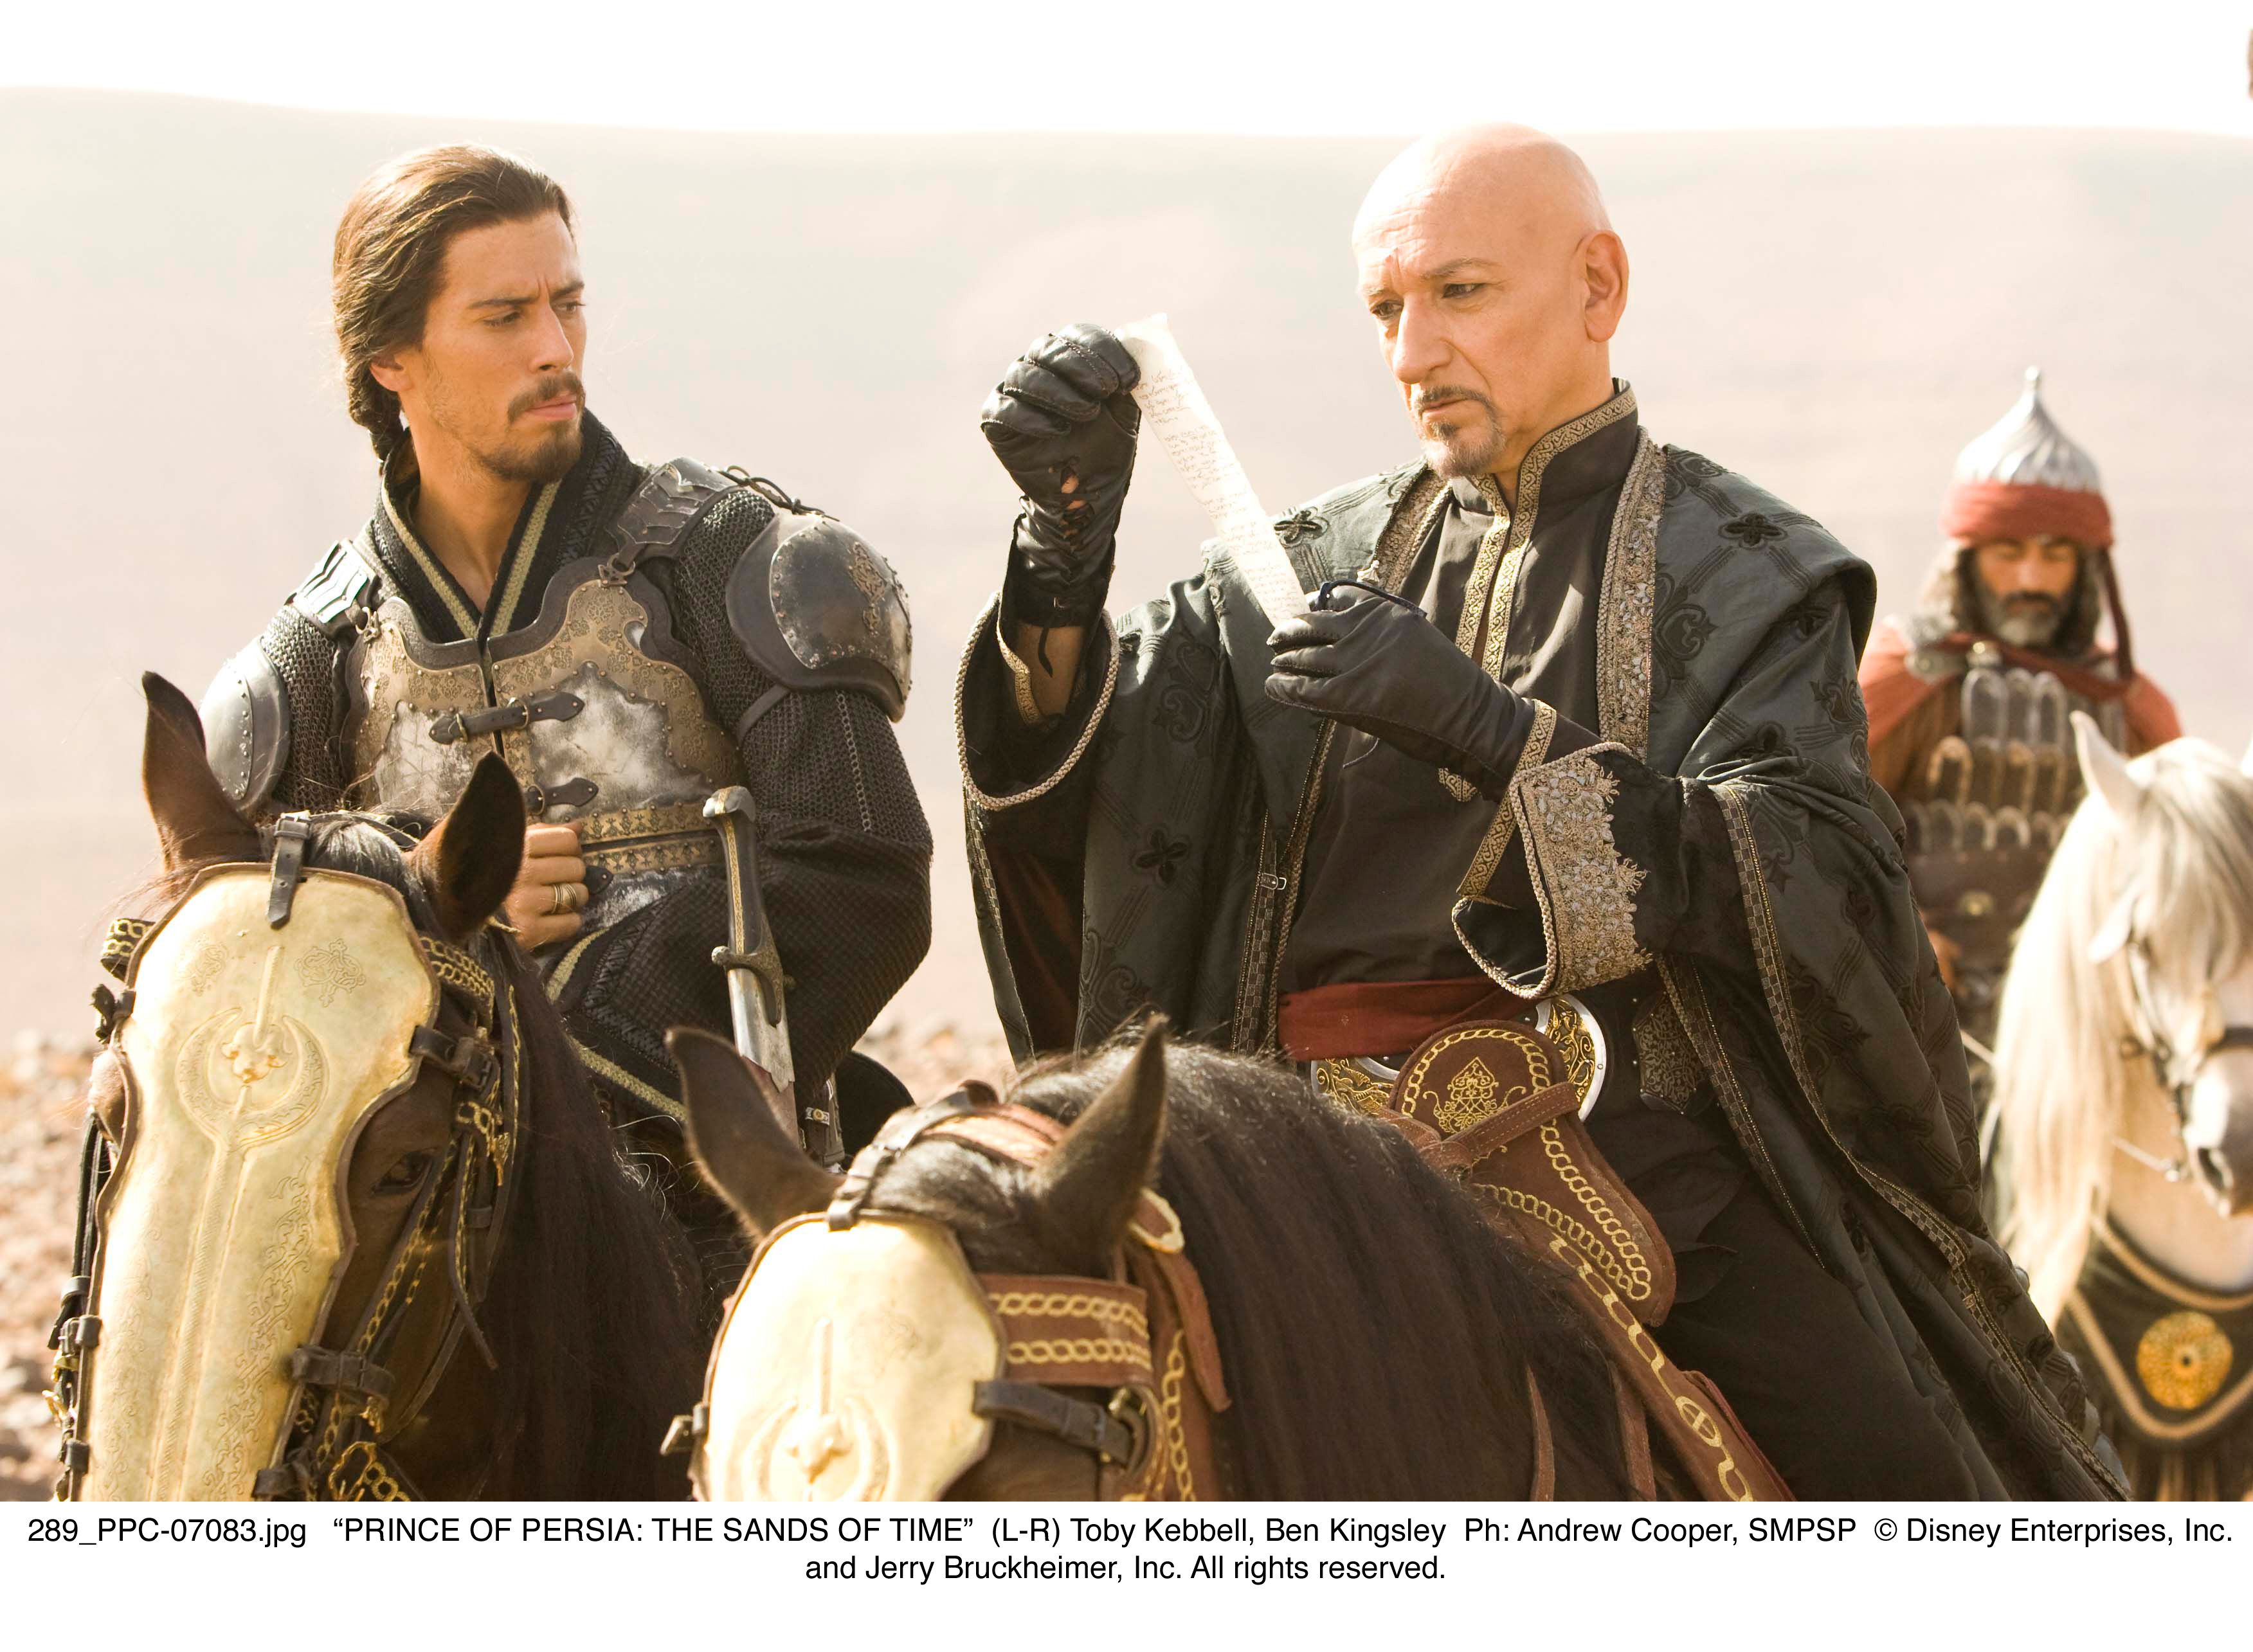 Ben Kingsley Discusses His Role in Prince of Persia: The Sands of Time